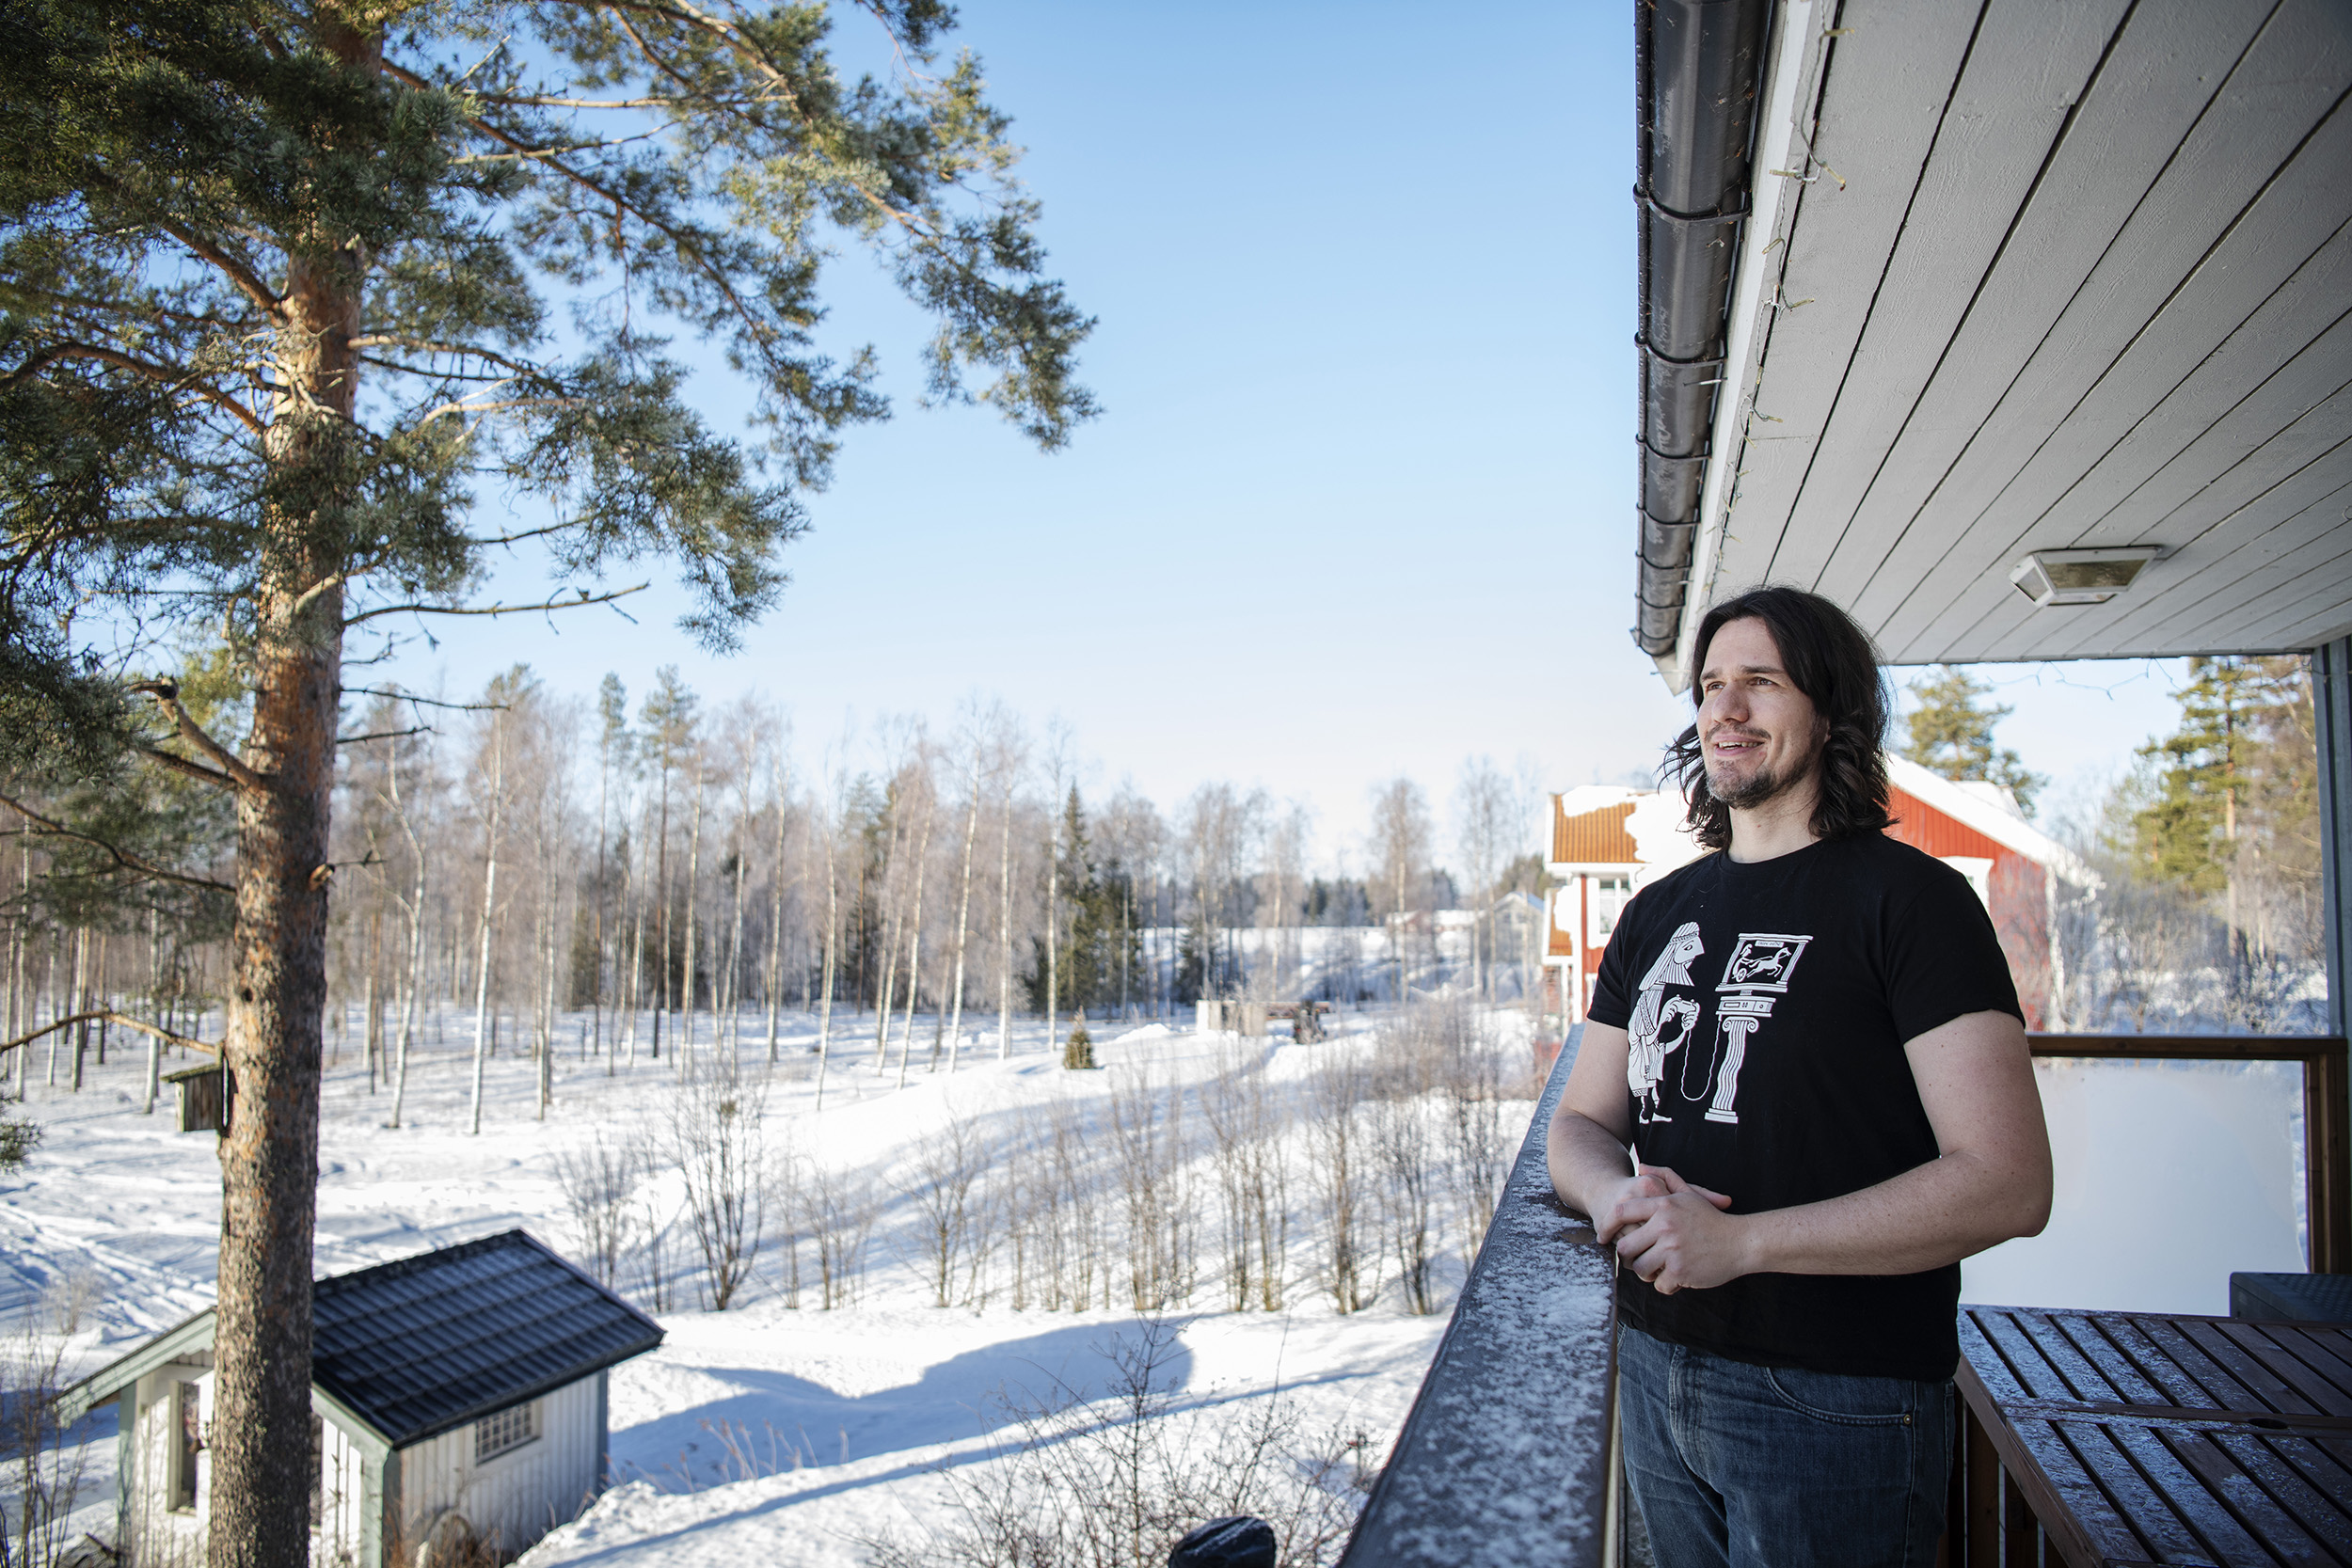 Marcus Liwicki outside his home, a white brick house in a snowy landscape.